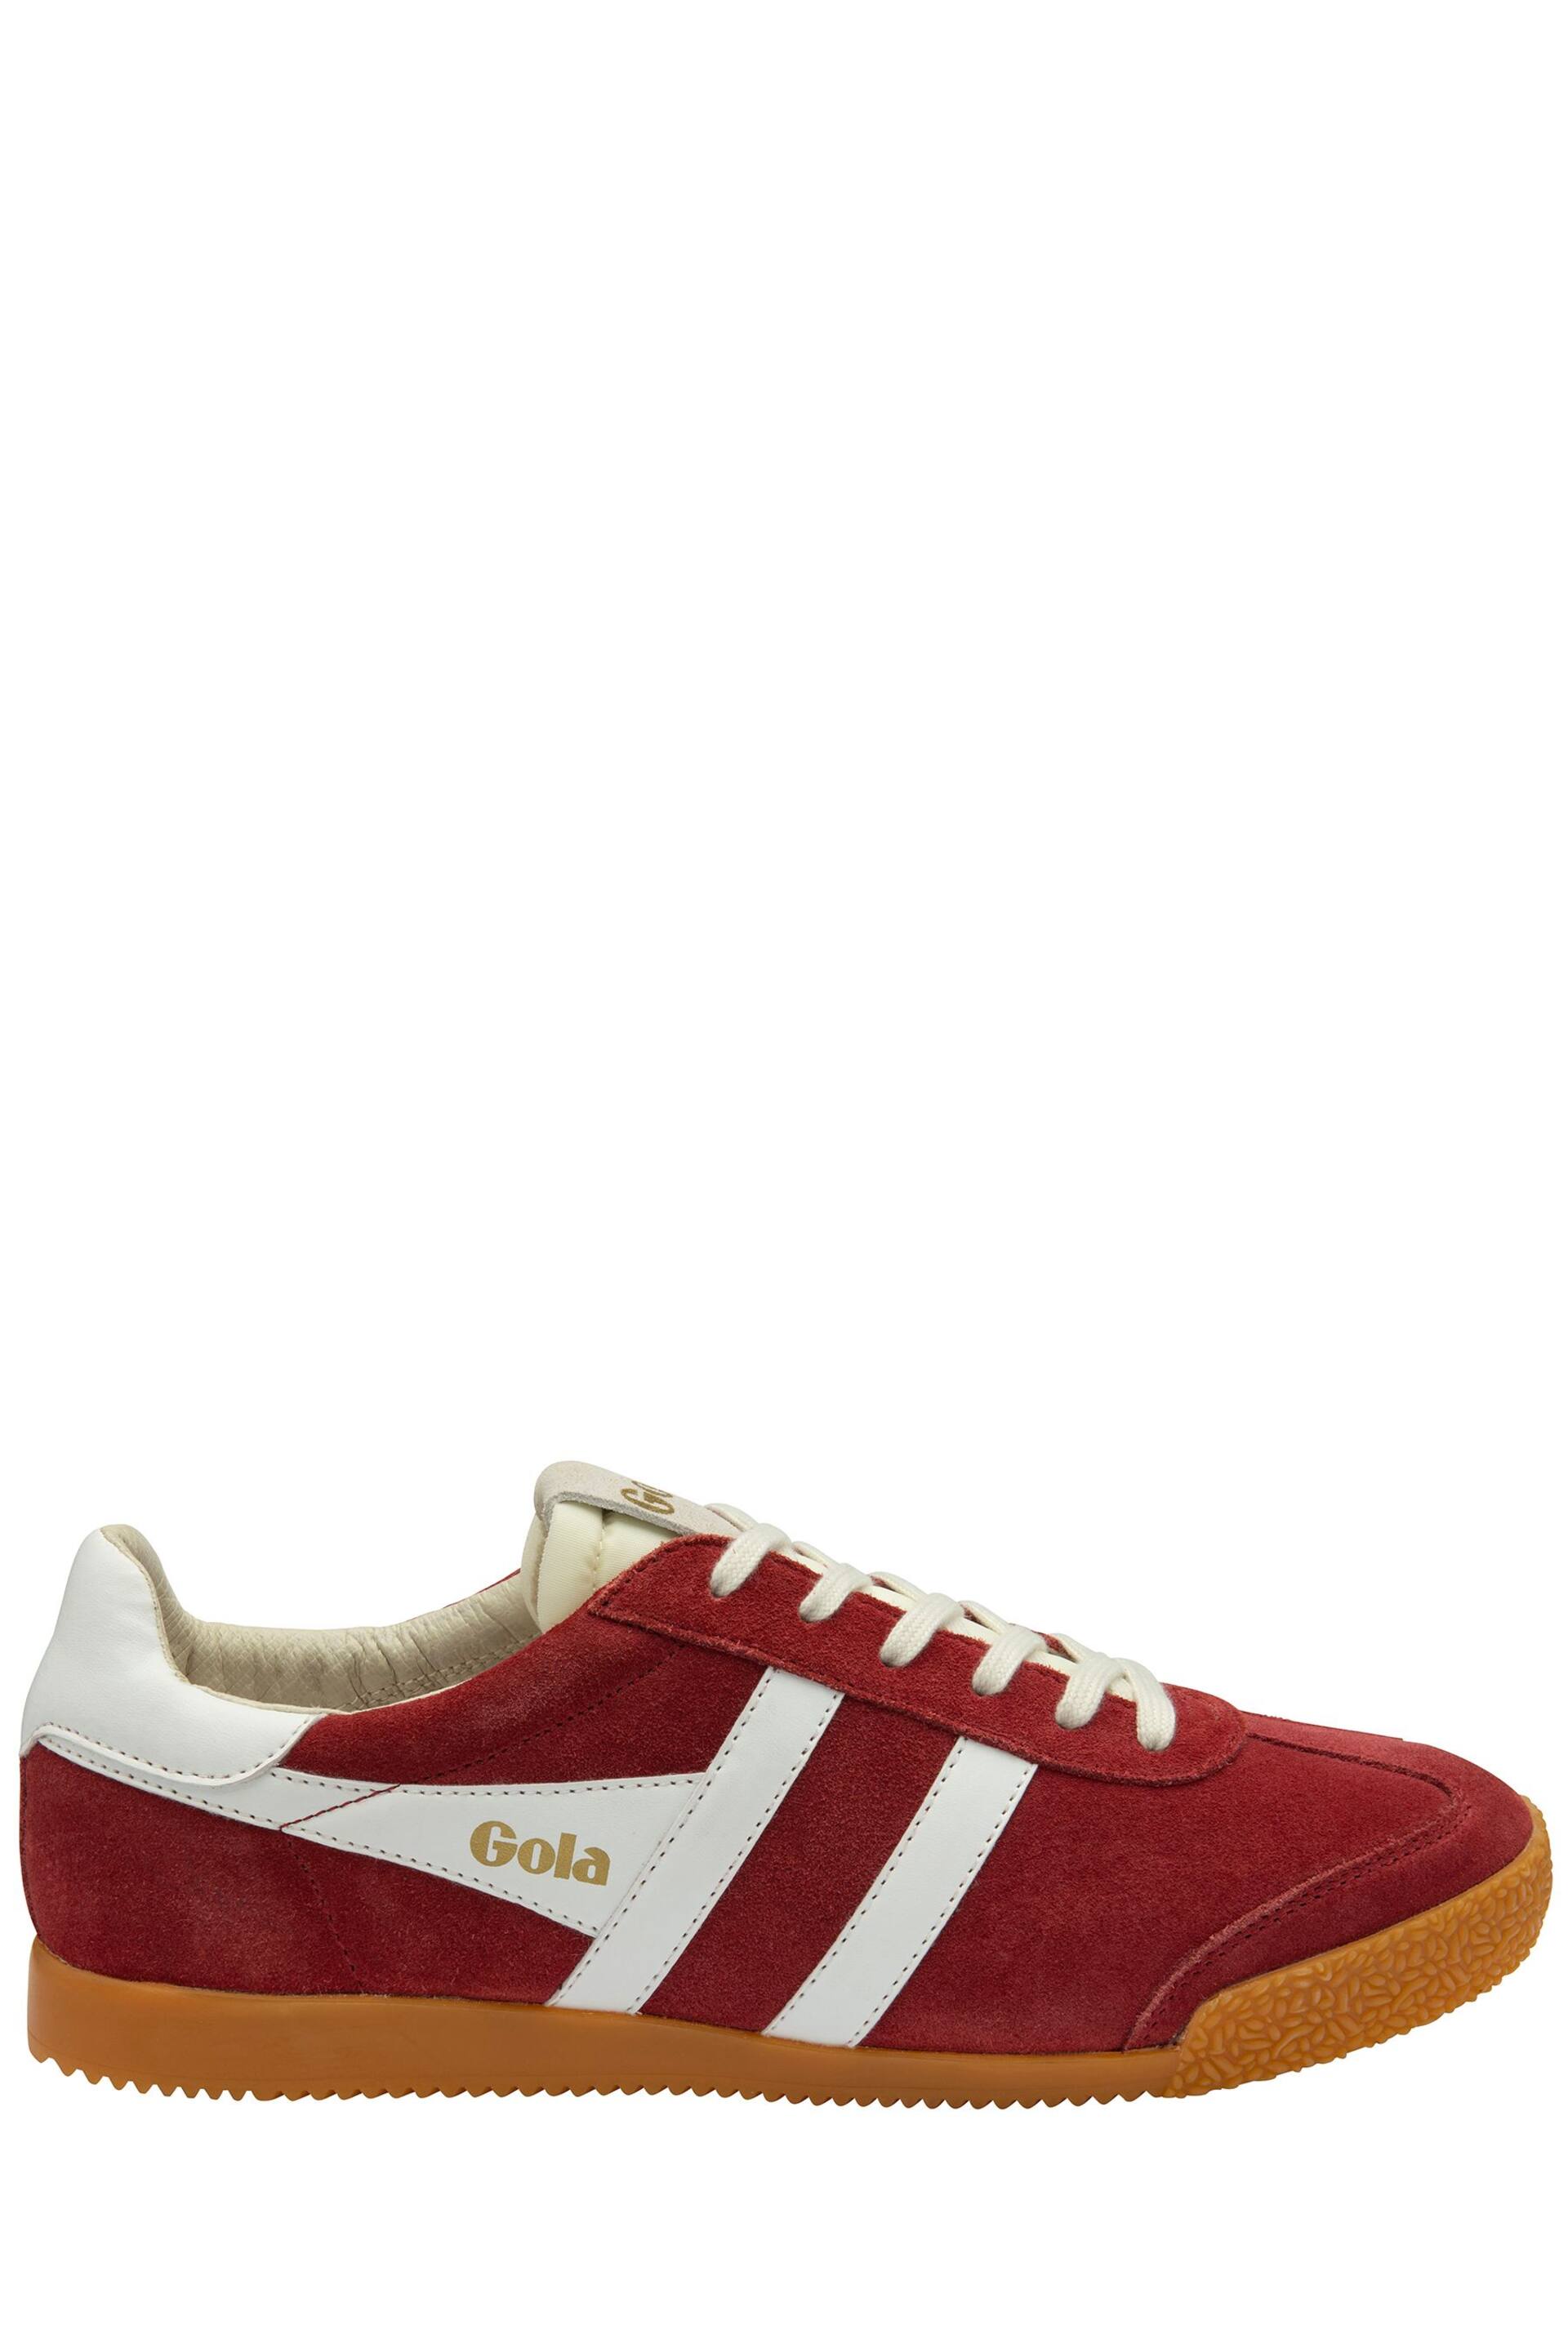 Gola Red Mens Elan Suede Lace-Up Trainers - Image 1 of 4